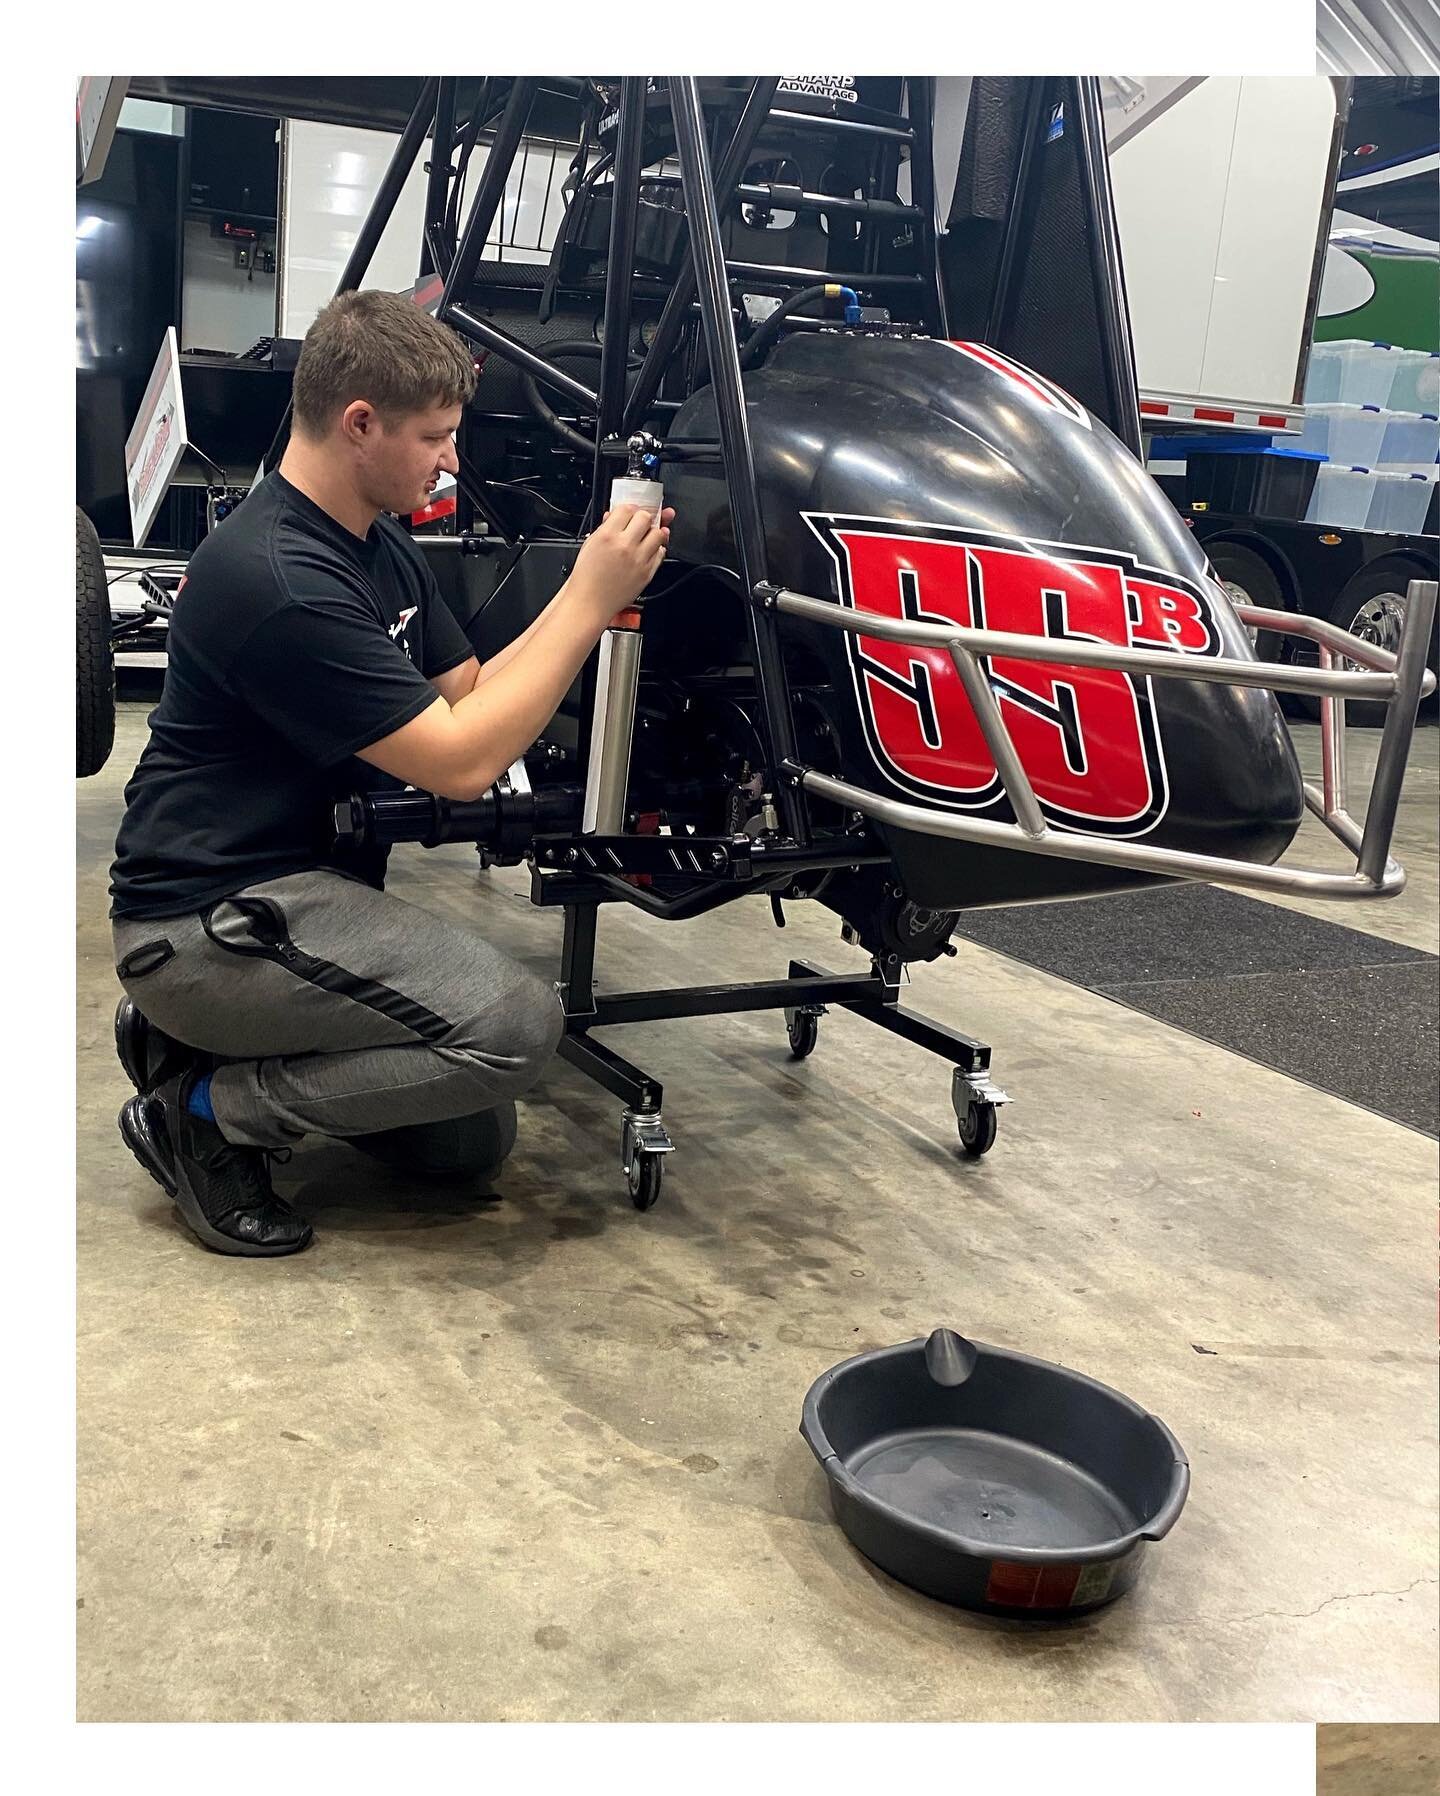 18 days till we are on track with the @lucasoilascs! It&rsquo;s grind time! 
#letsgo #sprintcar #racecar #dirtracing #ascs #driver #teamwork #racing #racer